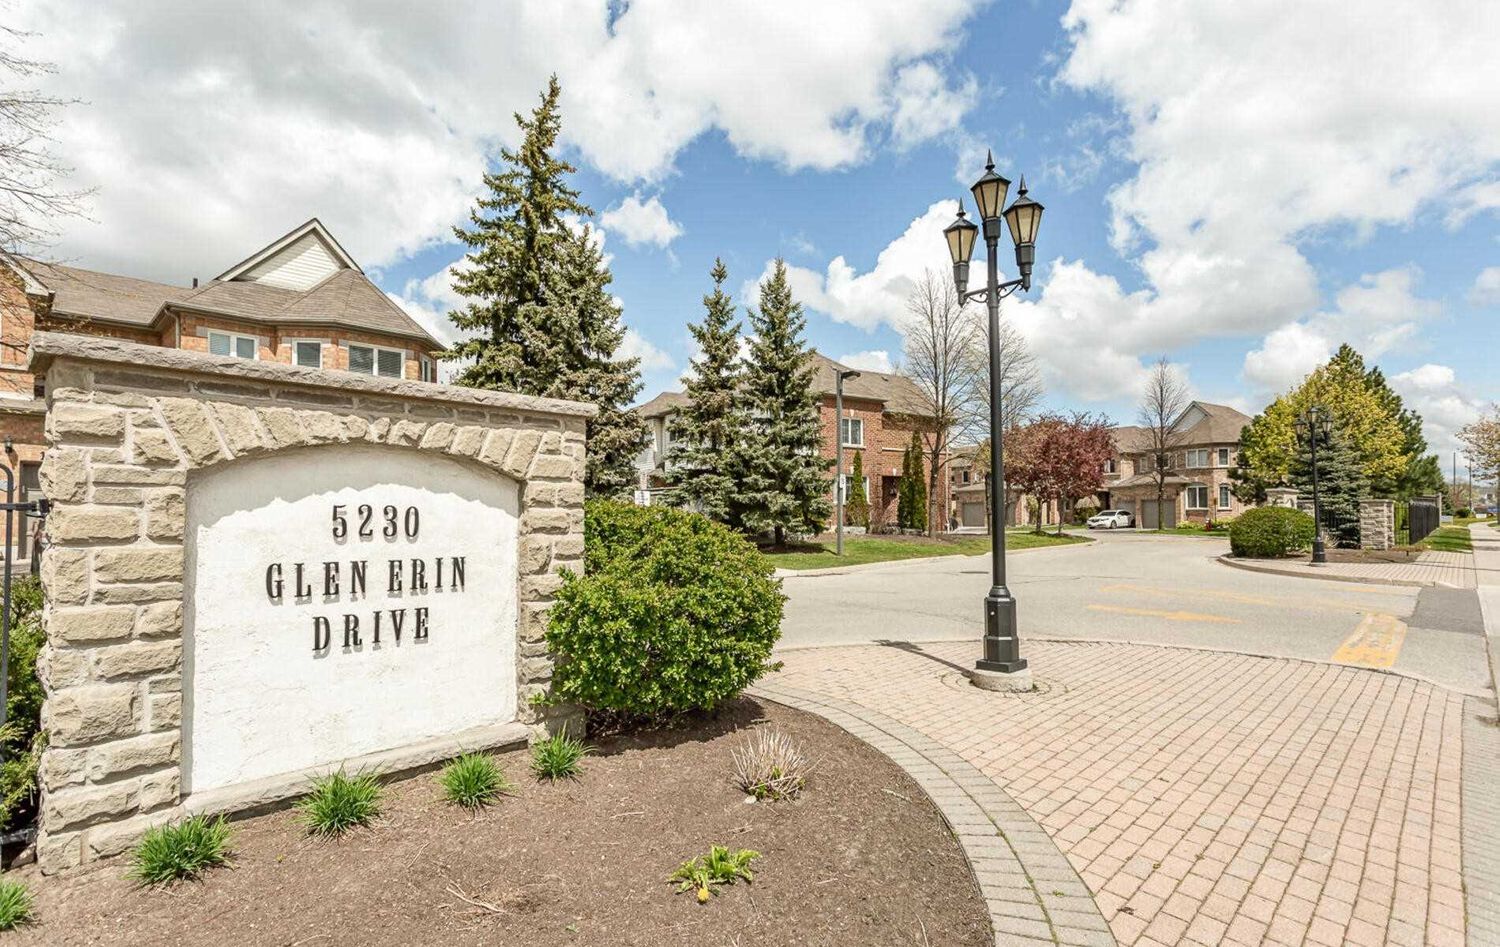 5230 Glen Erin Drive. 5230 Glen Erin Drive Townhomes is located in  Mississauga, Toronto - image #1 of 2